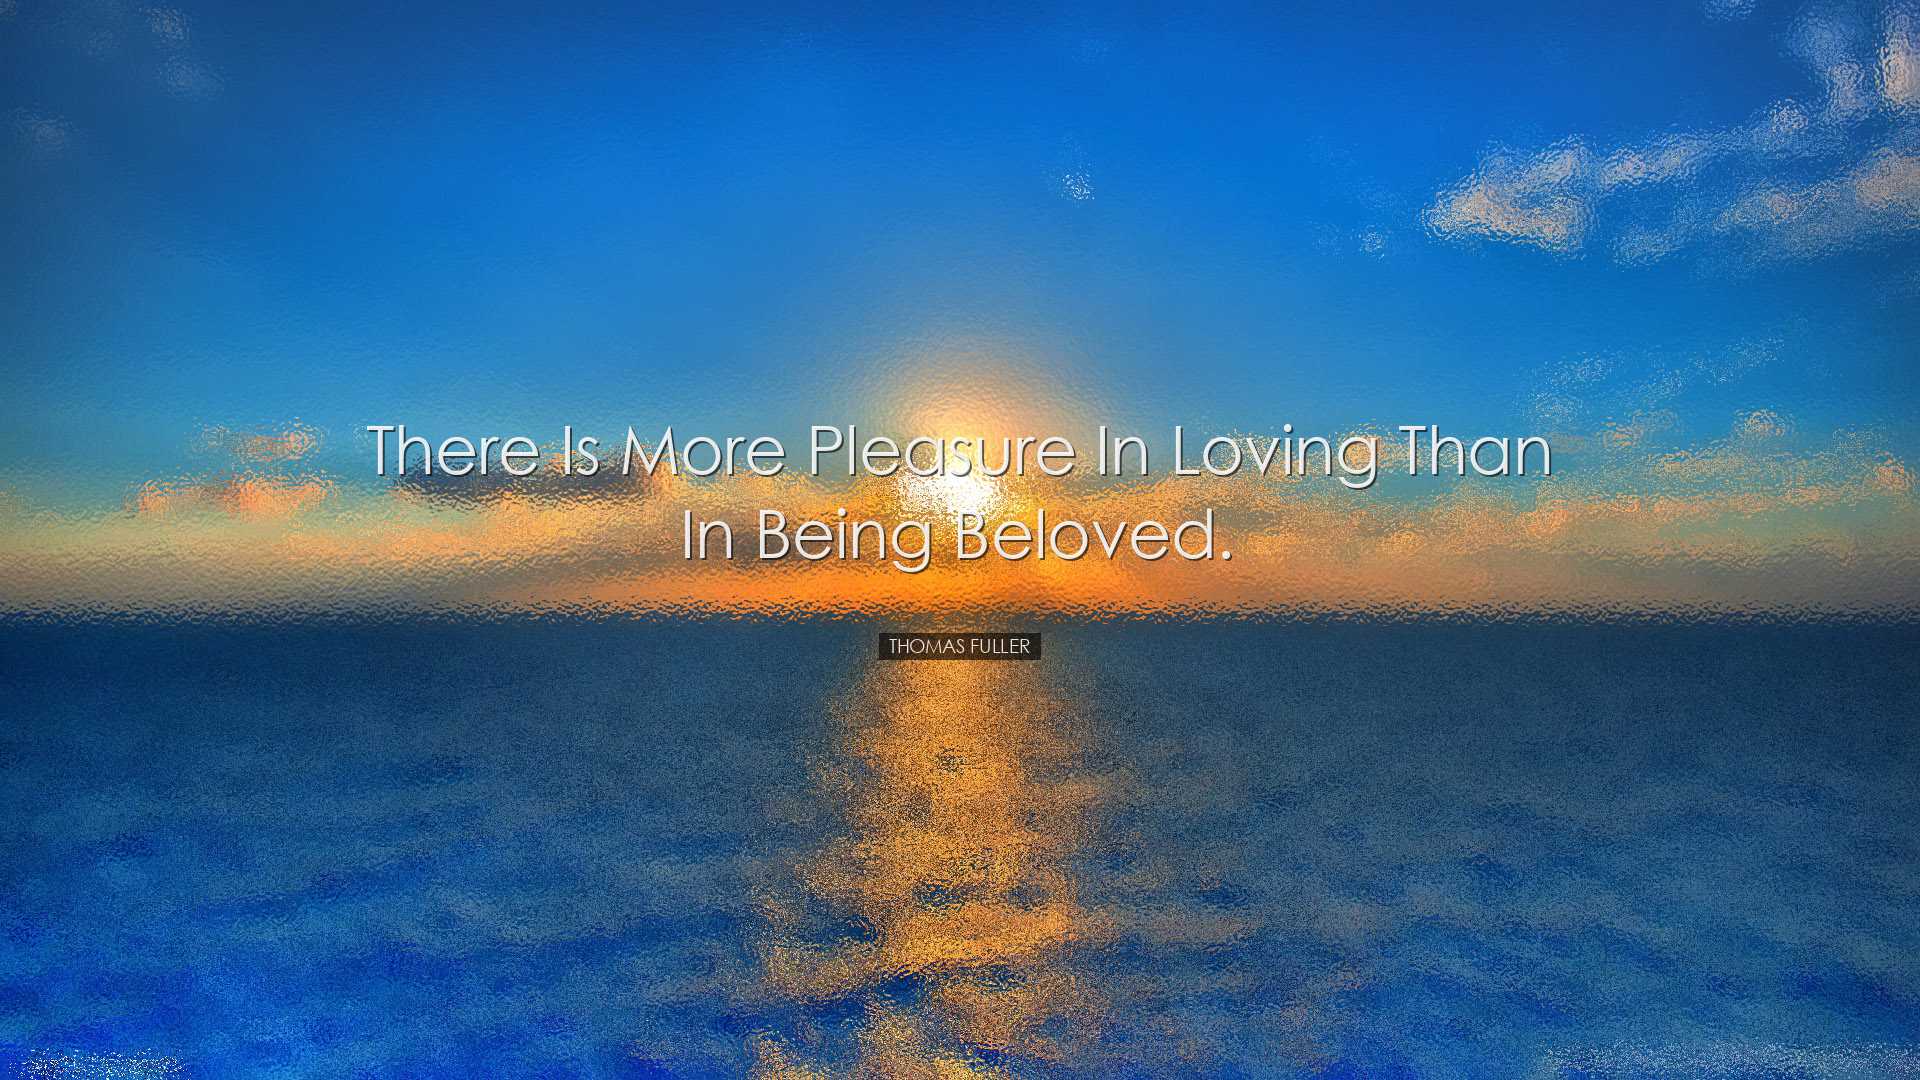 There is more pleasure in loving than in being beloved. - Thomas F